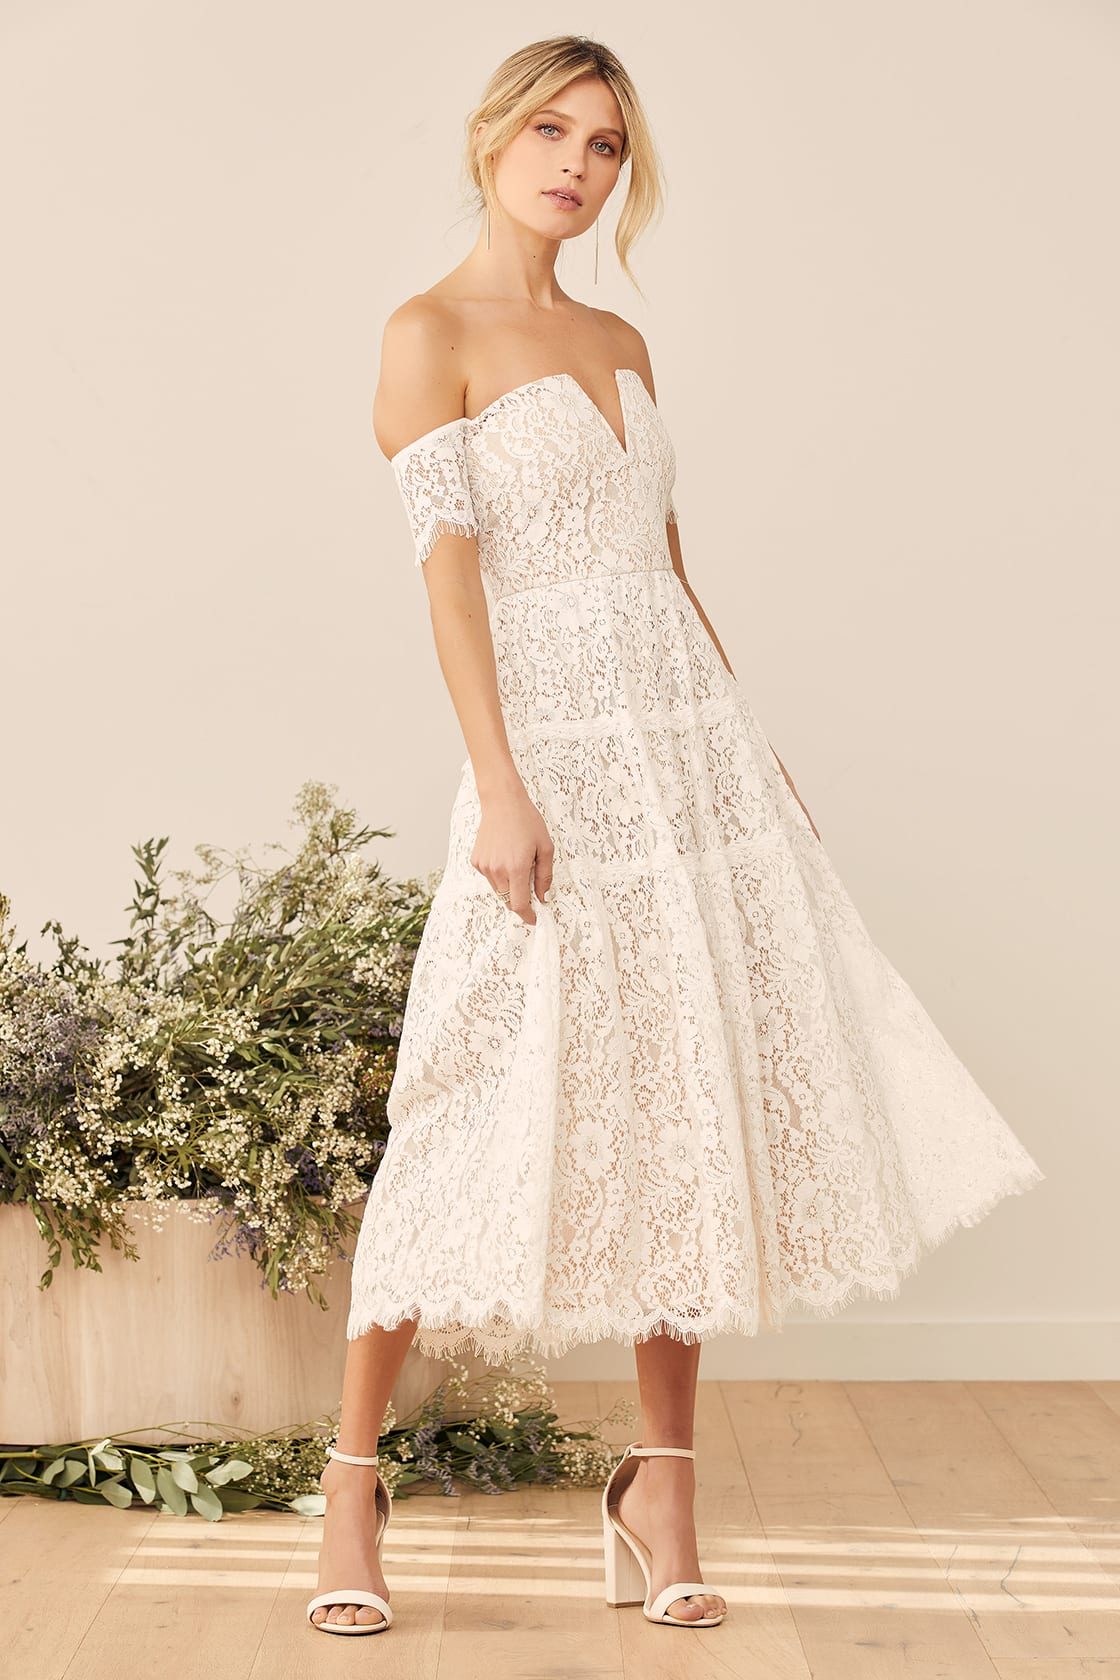 Midi White Lace Off-the-Shoulder Casual Wedding Dress